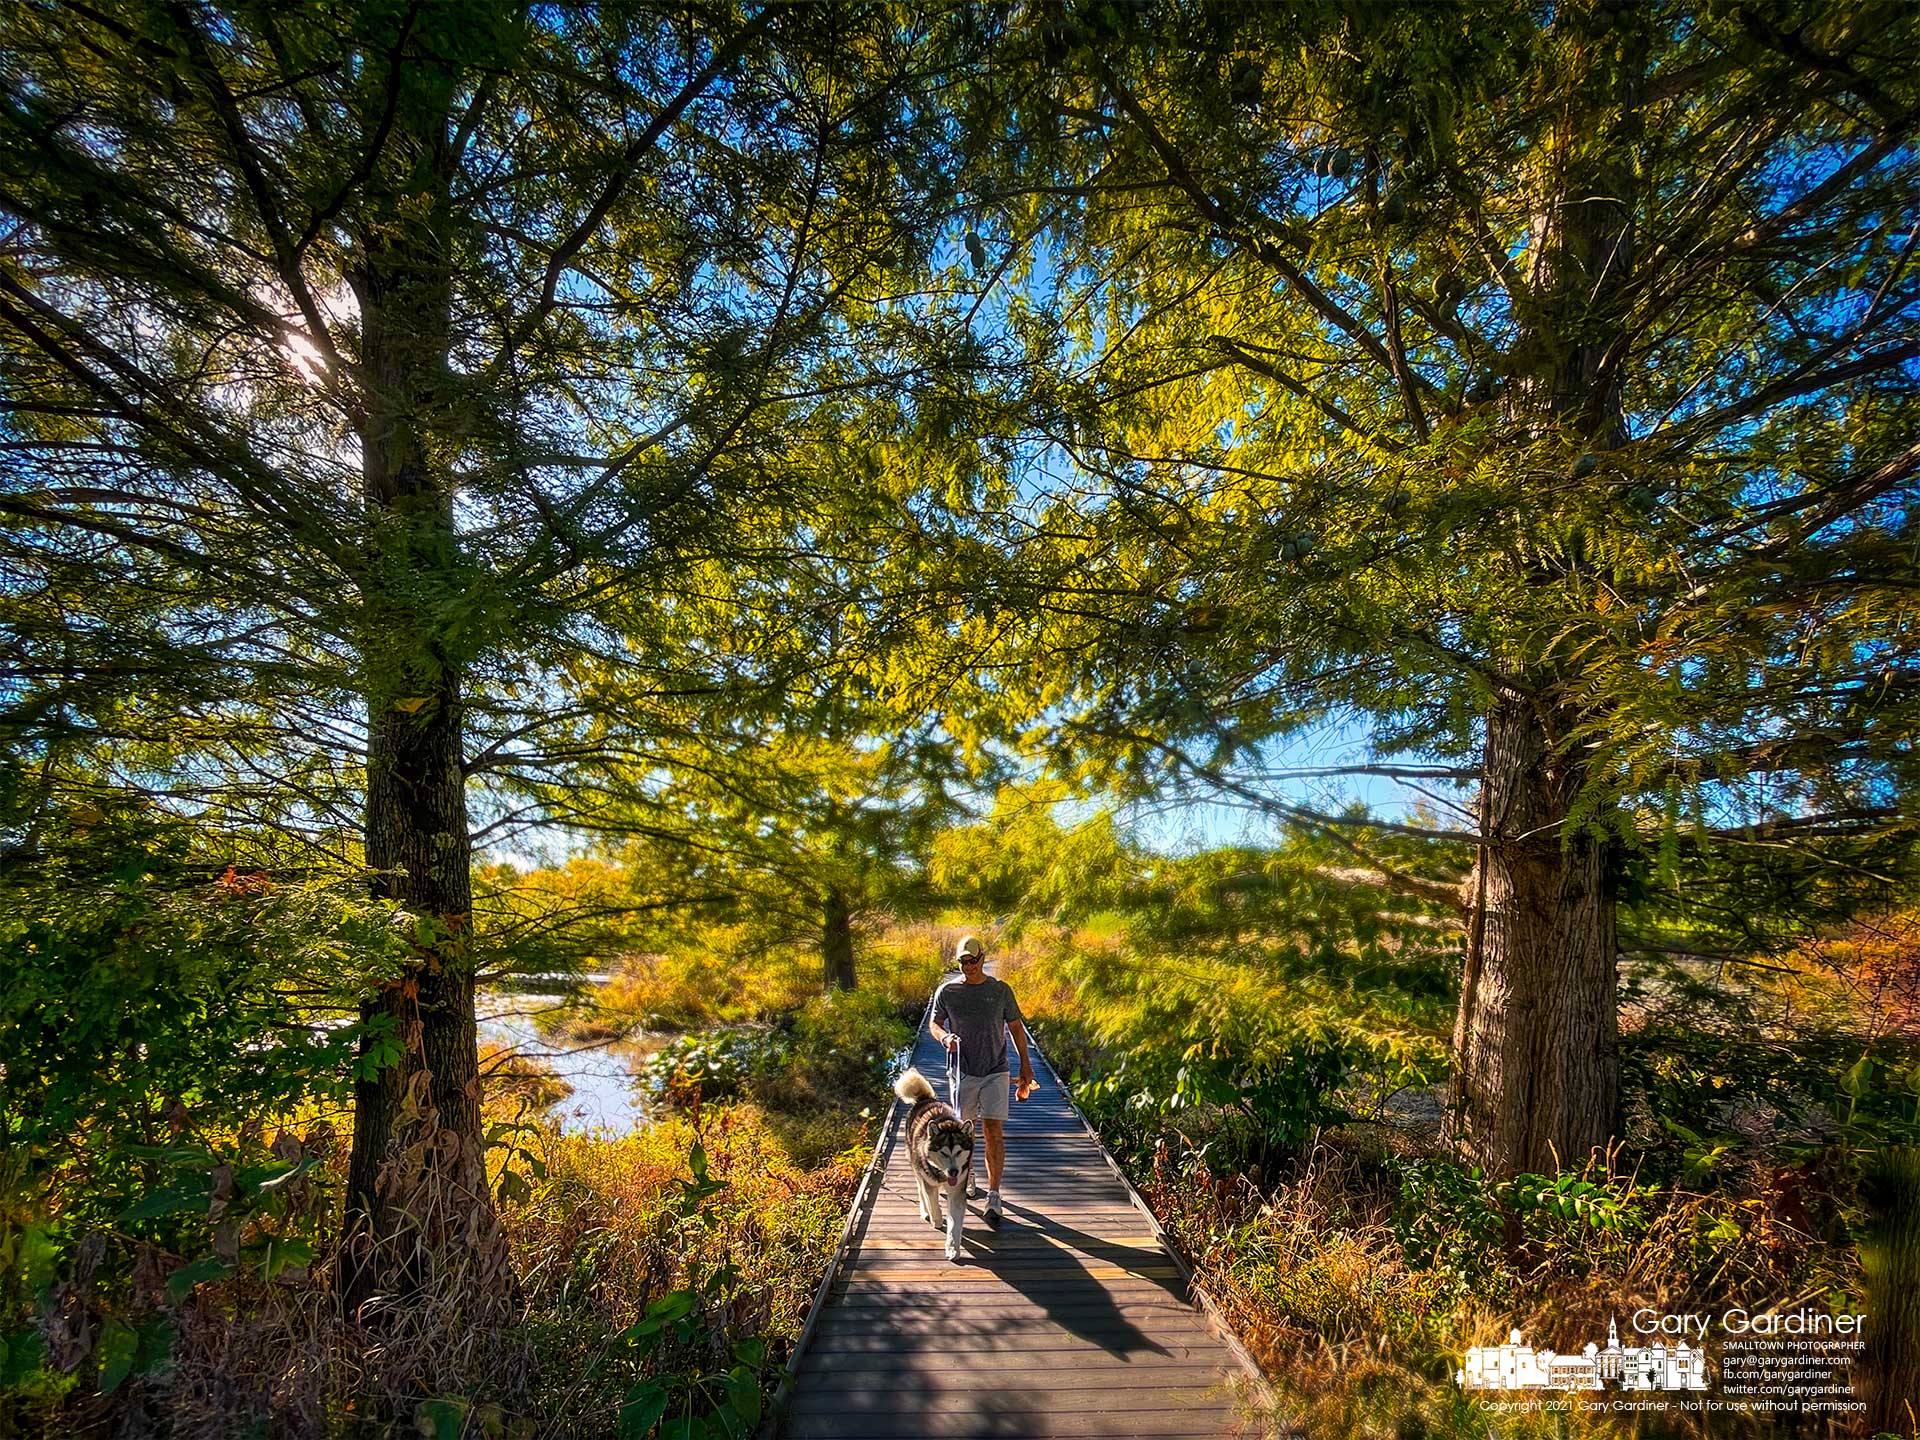 A malamute and his human companion walk in afternoon light across the short bridge spanning the main flow at the Highlands Park wetlands. My Final Photo for Oct. 18, 2021.